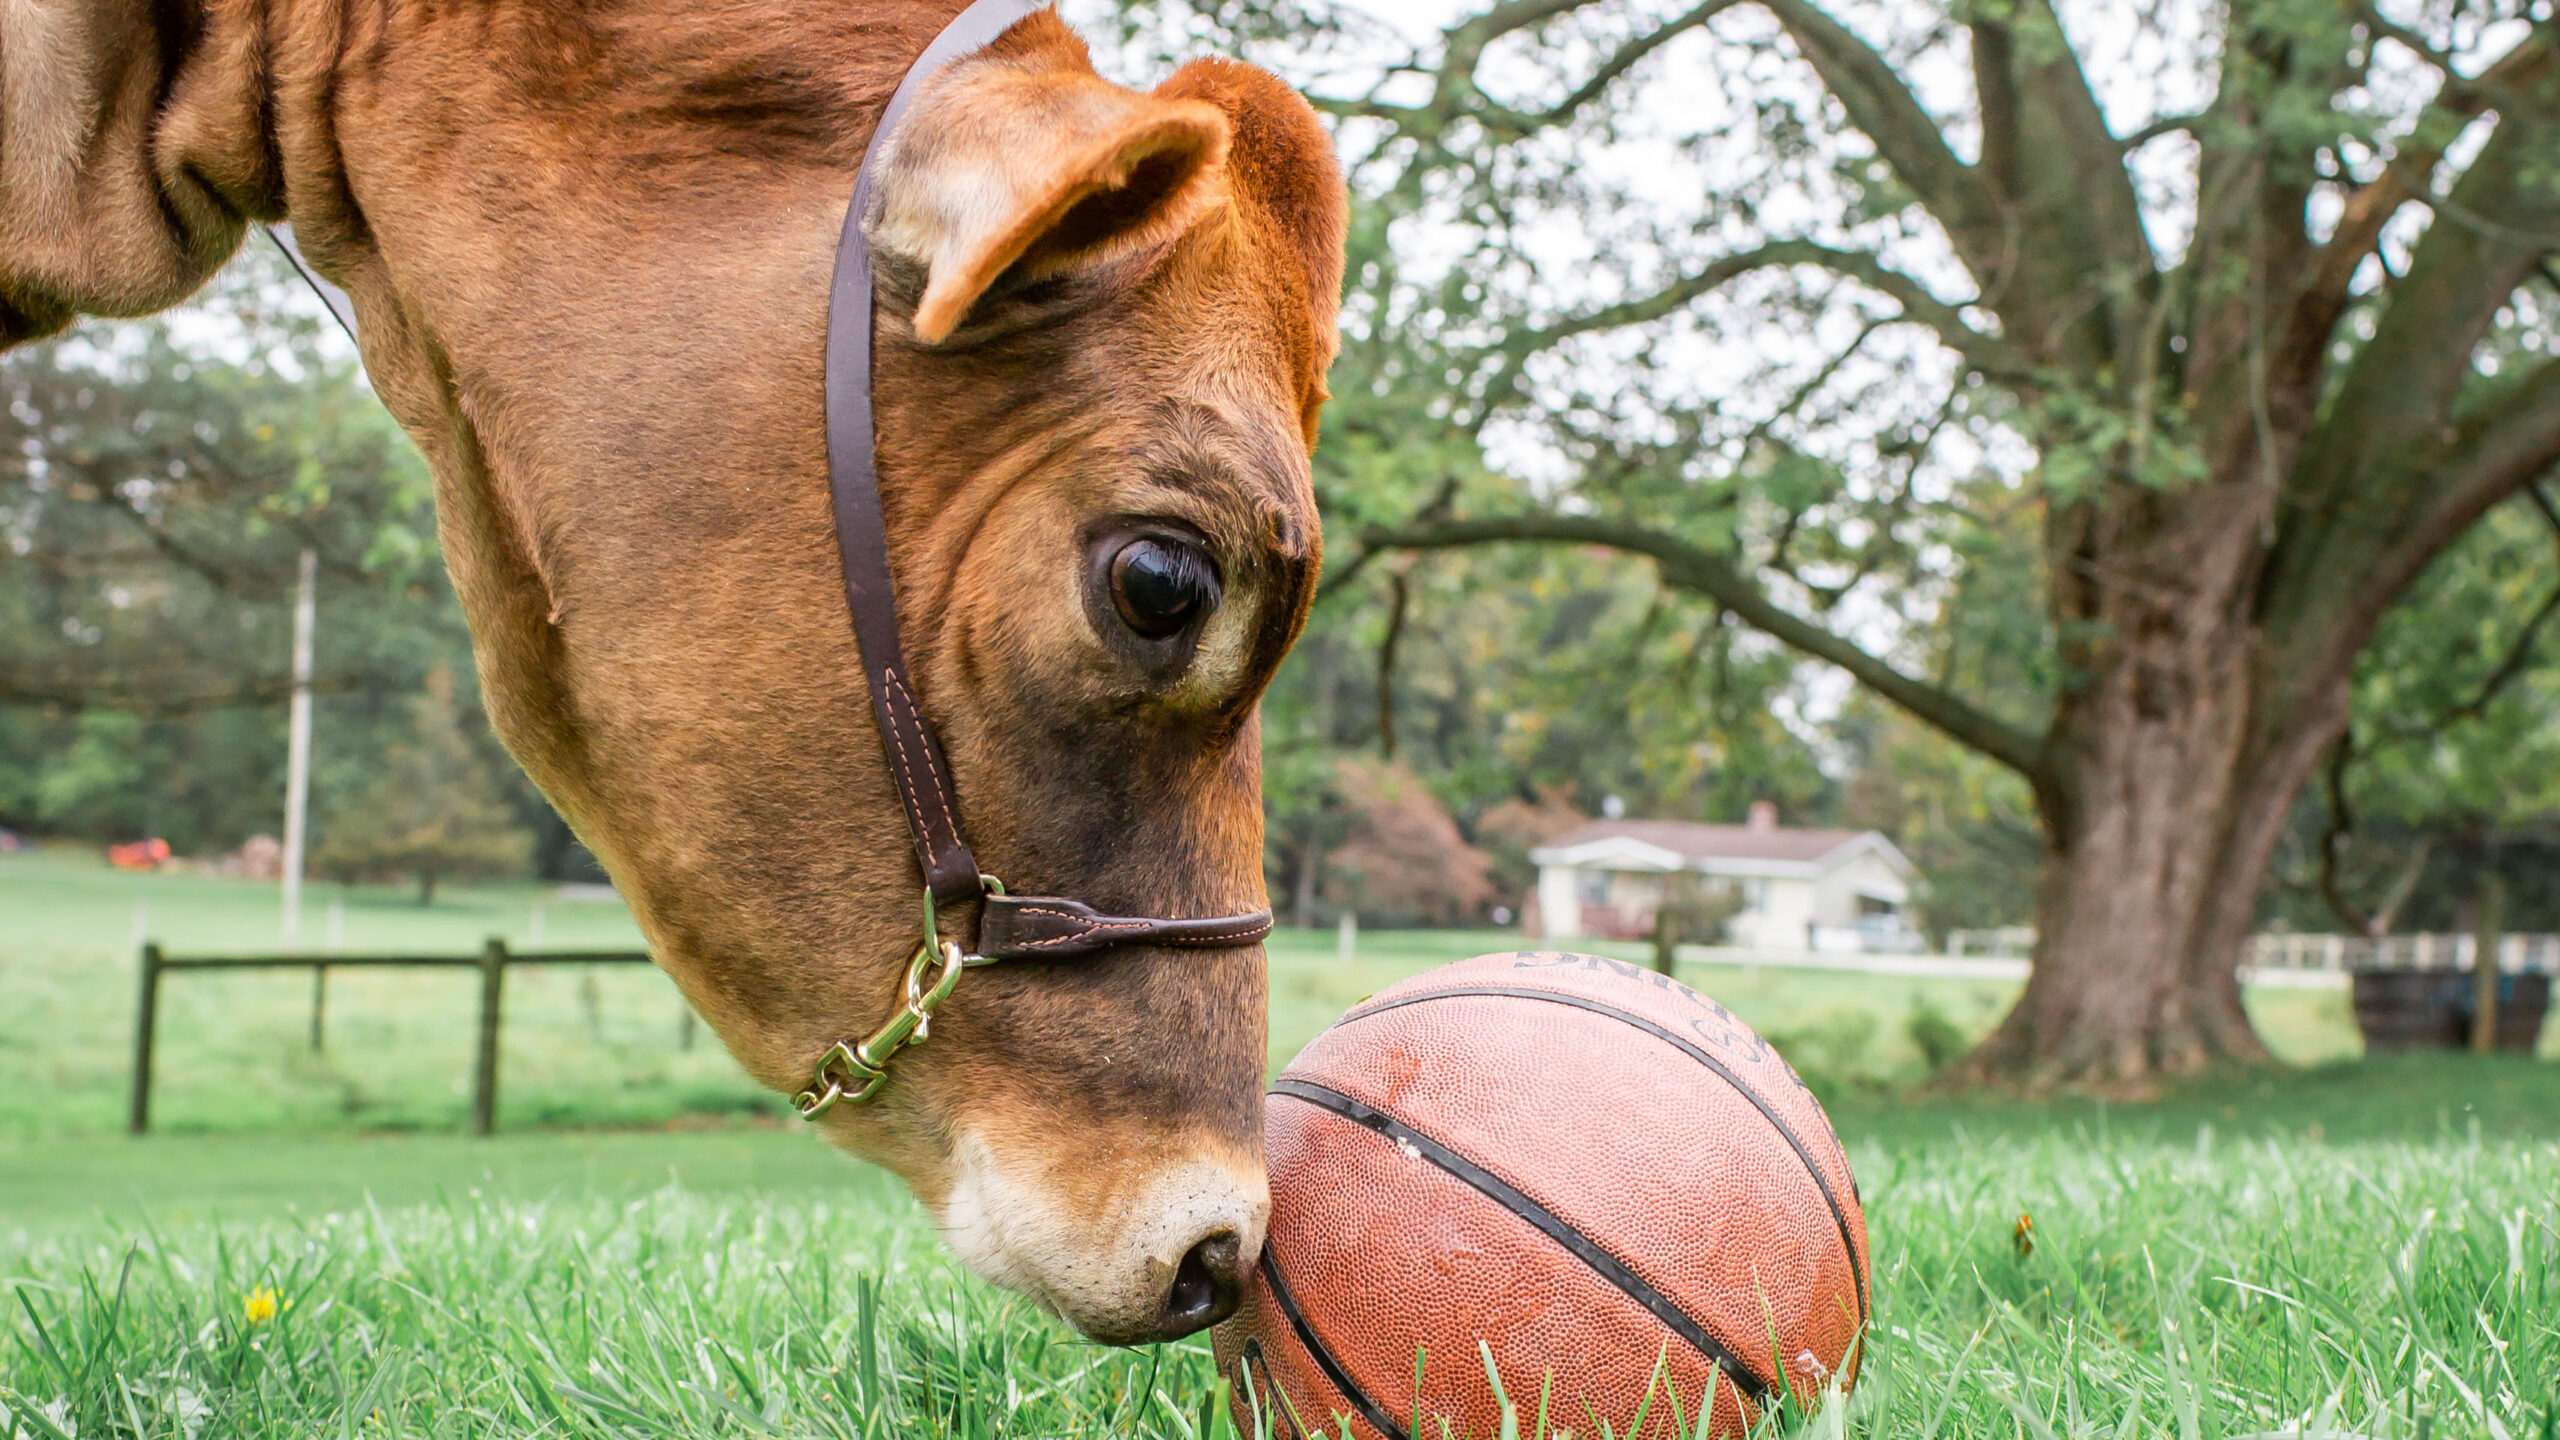 Cow pushing a basketball with its nose